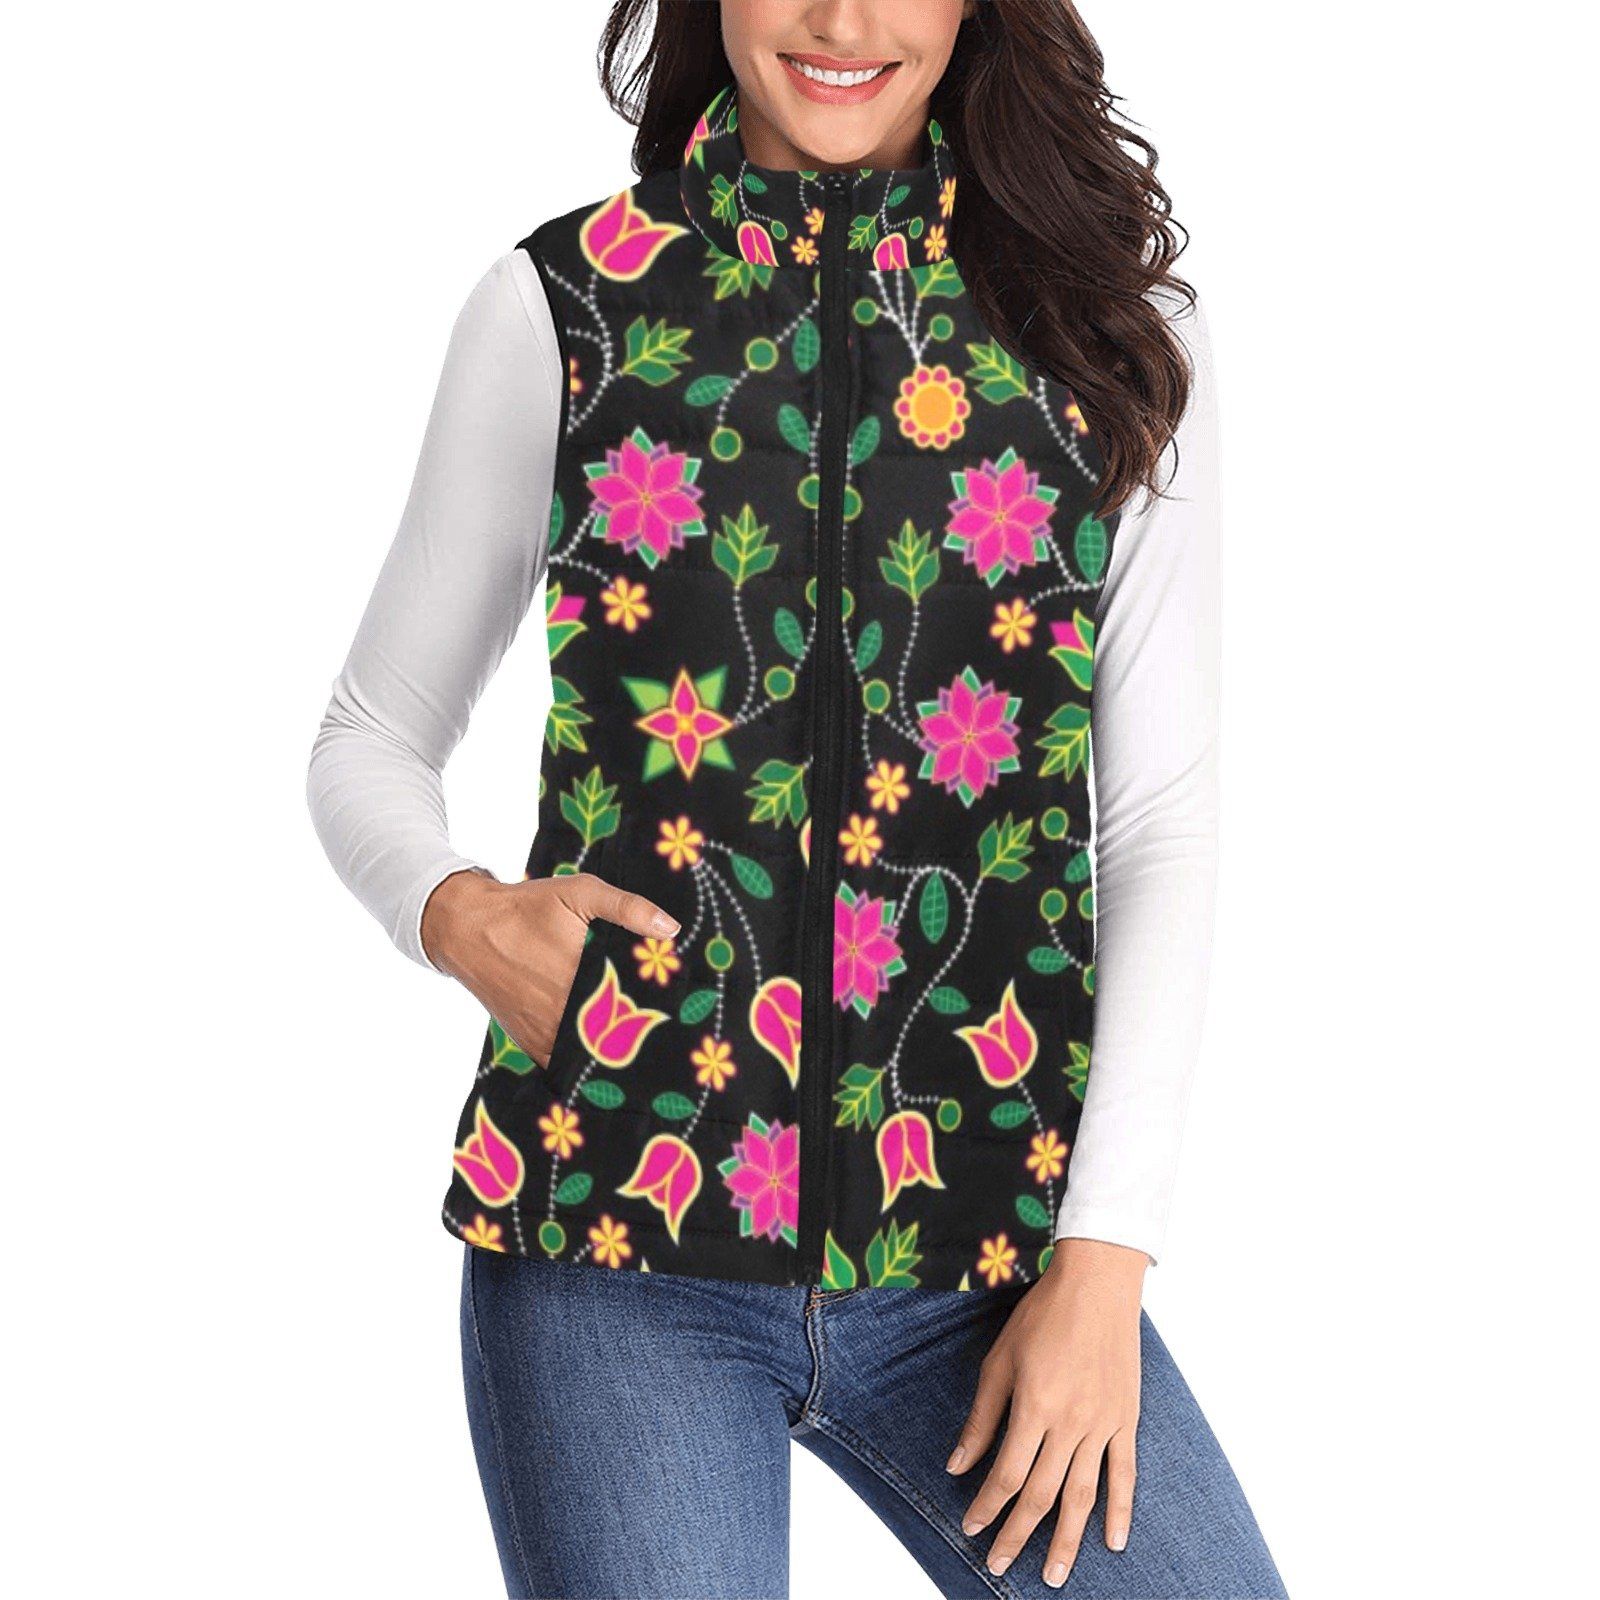 Floral Bearpaw Pink and Yellow Women's Padded Vest Jacket (Model H44) Women's Padded Vest Jacket (H44) e-joyer 